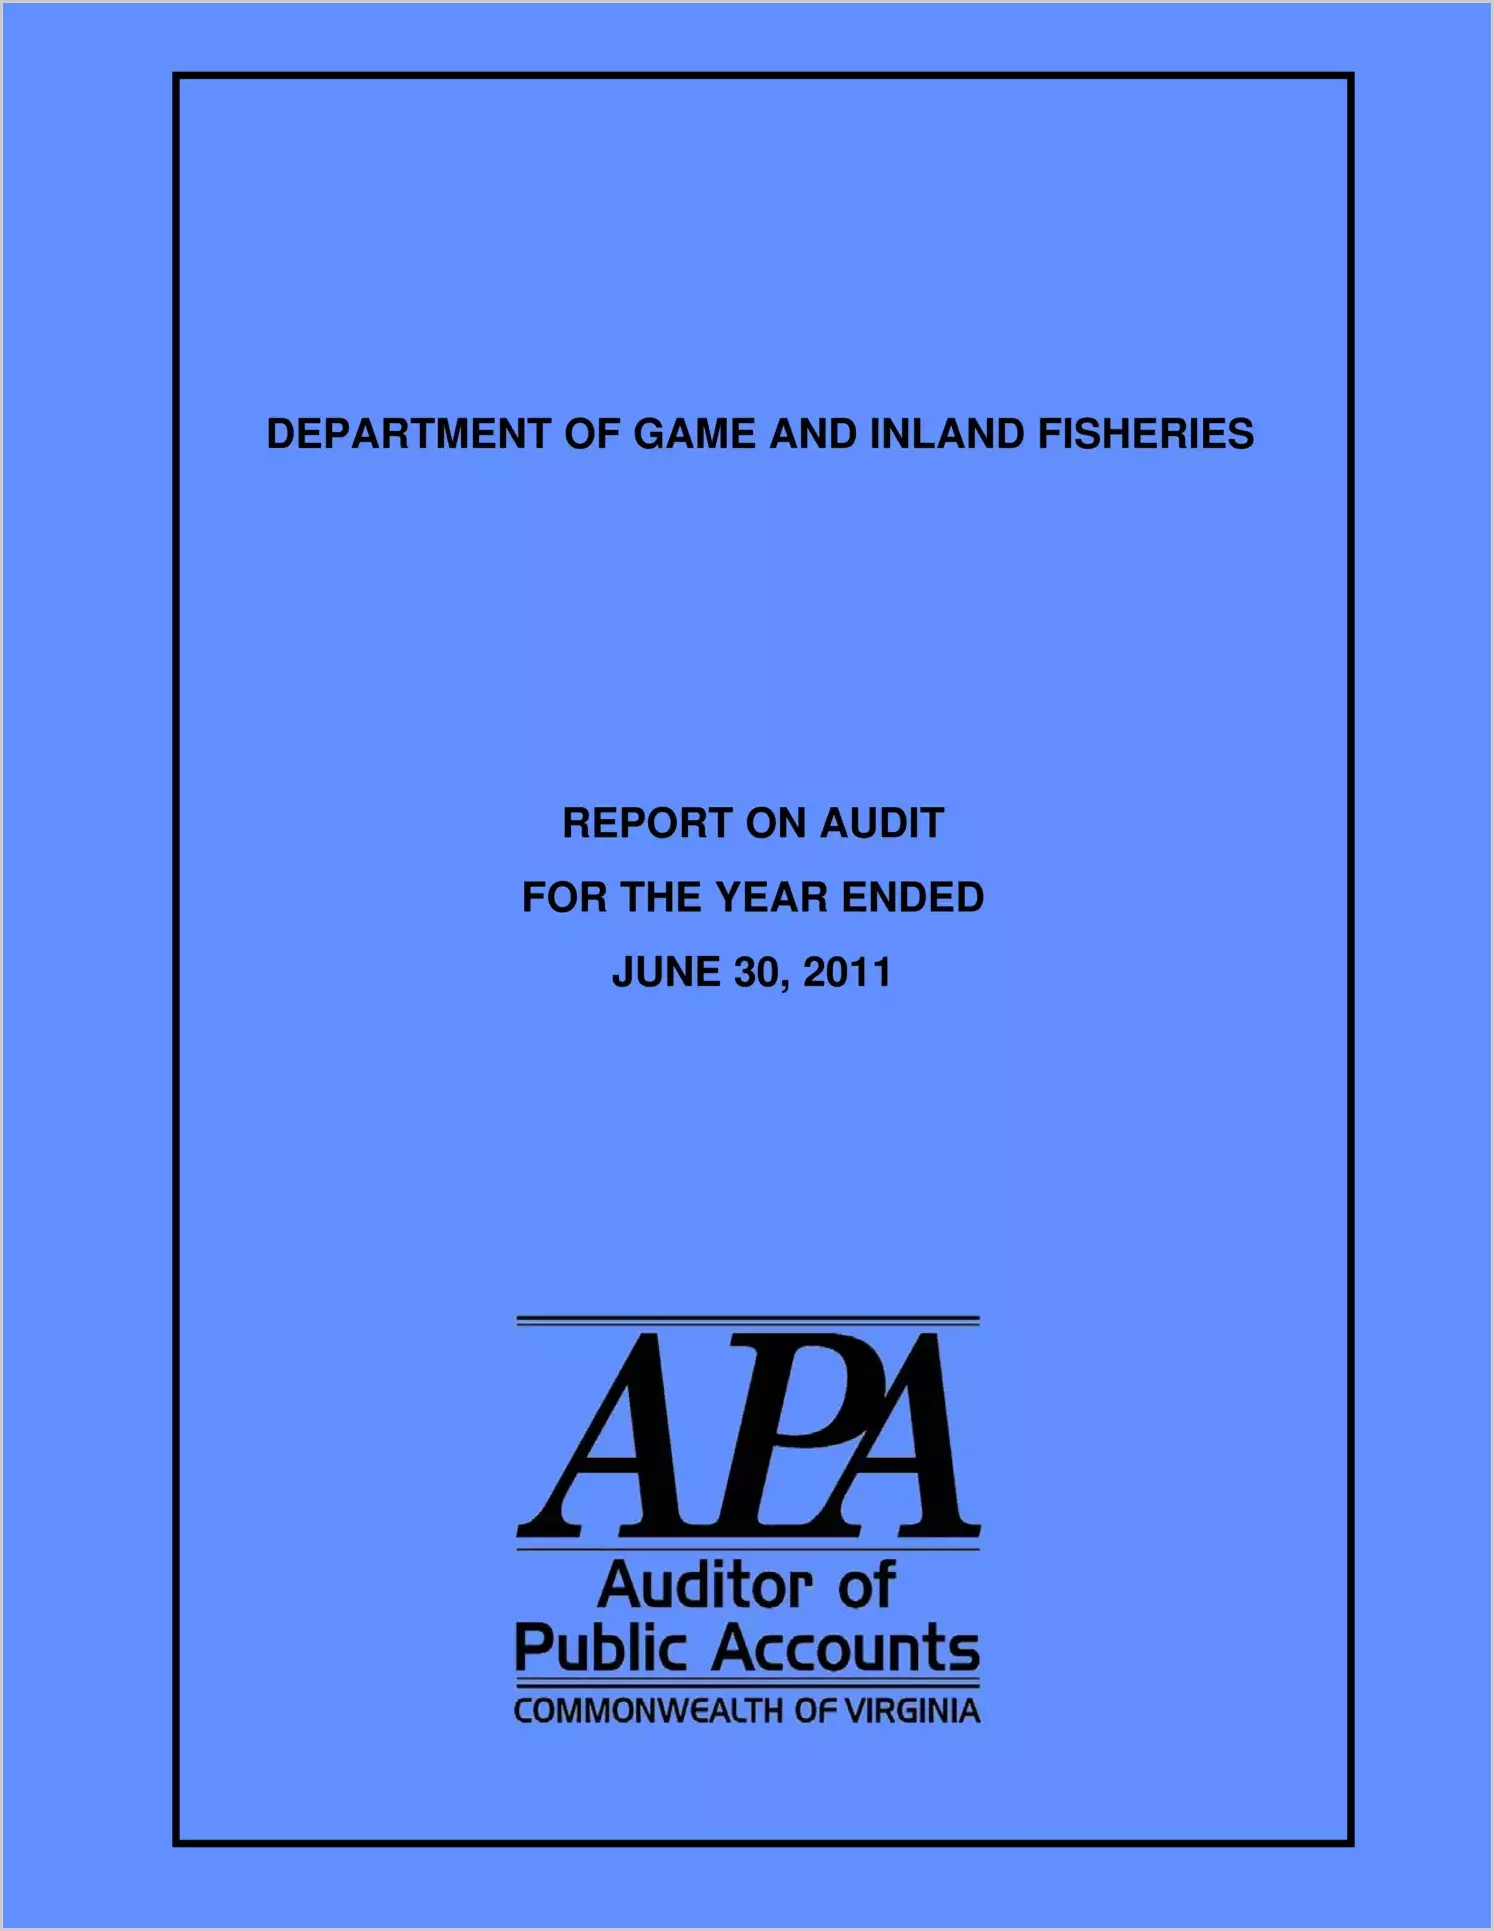 Department of Game and Inland Fisheries Report on Audit for the fiscal year ended June 30, 2011